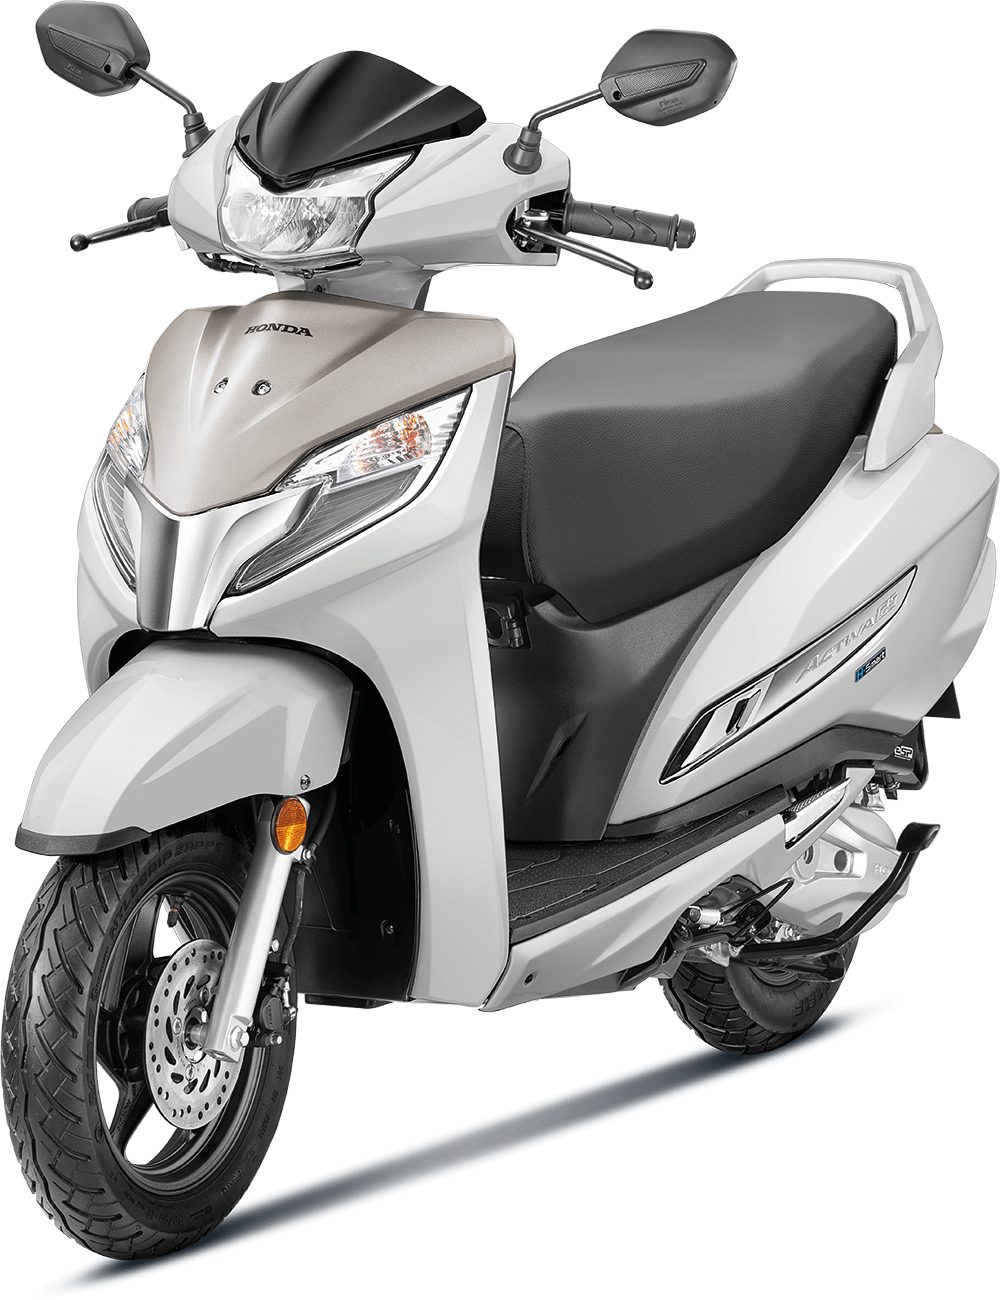 Available Pearl Precious White With Salen Silver Metallic Honda Activa 125 OBD2 at reasonable price exclusively at Rushabh Honda, Nashik. Best Two wheeler Honda Dealers for years.